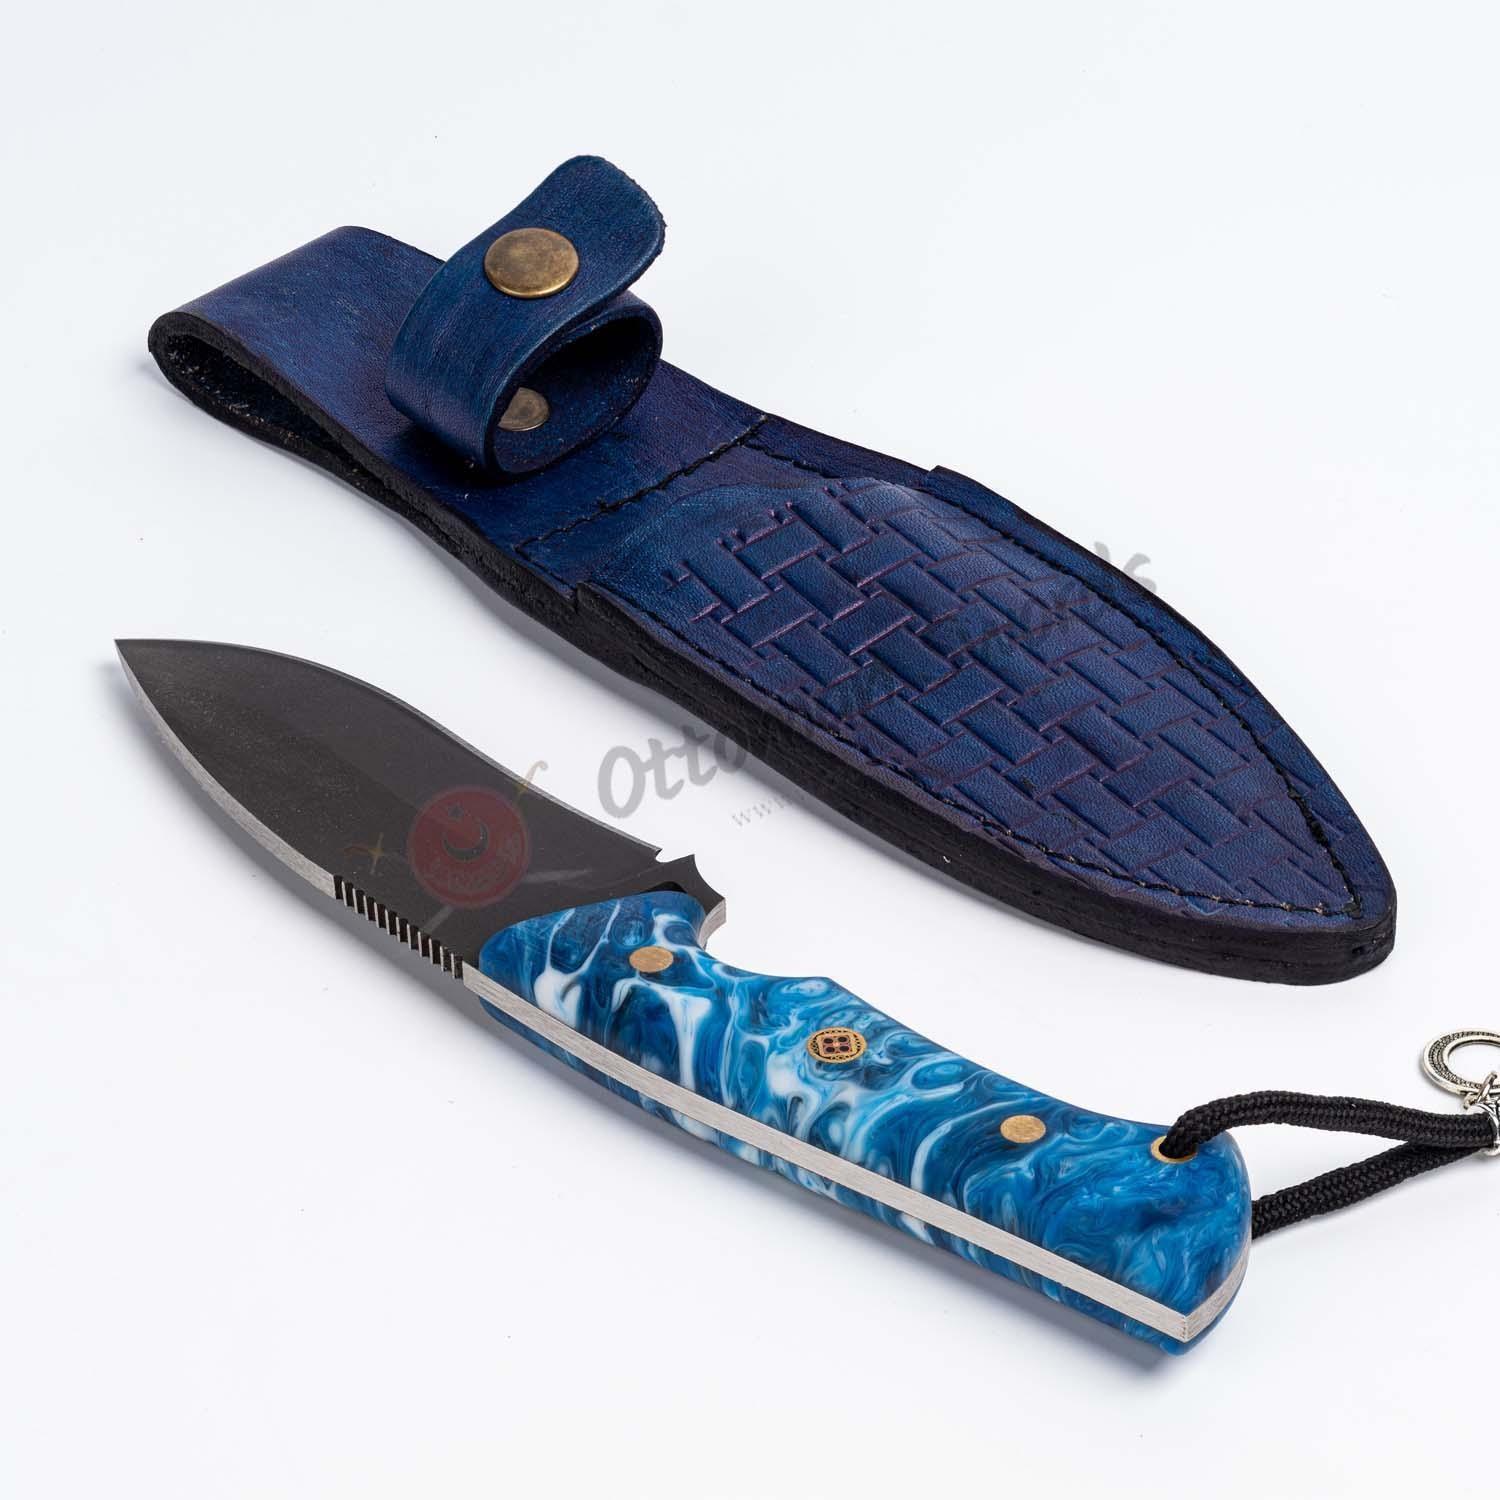 D2 Steel Survival BushCraft Knife Blue Epoxy Handle 10 İnches (3)